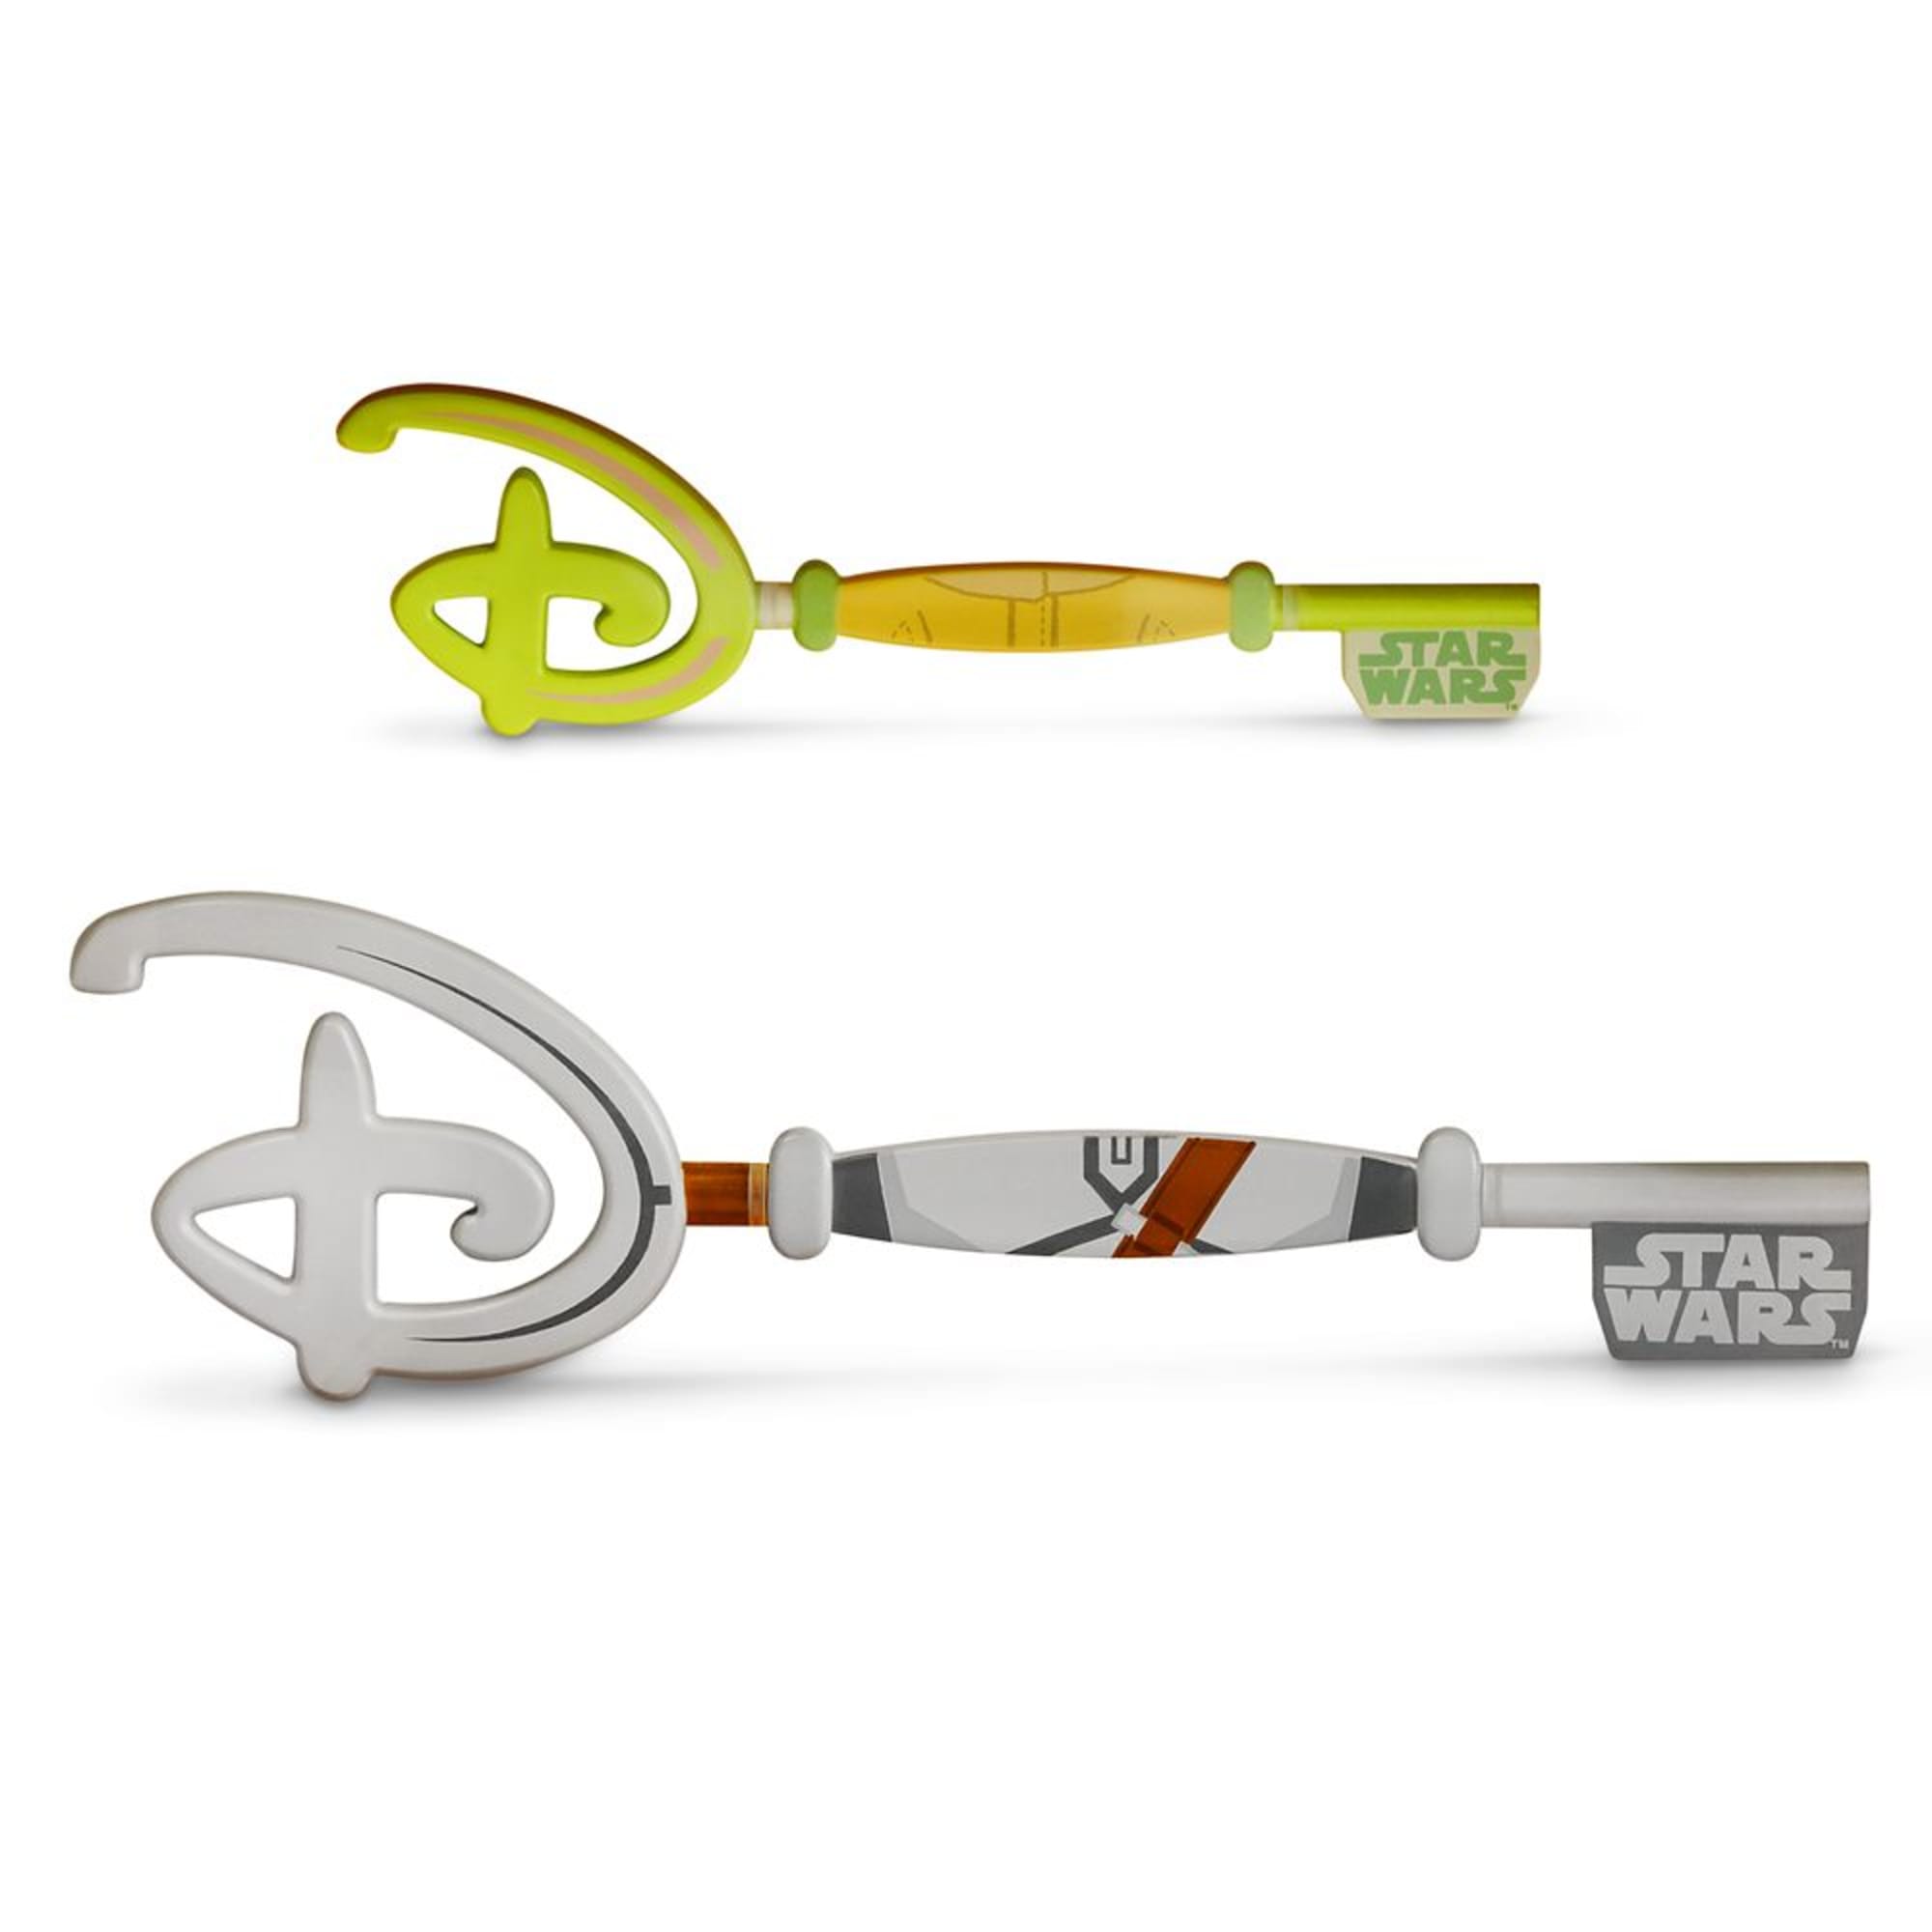 Disney Star Wars Opening Ceremony Key New with tags. May the 4th 